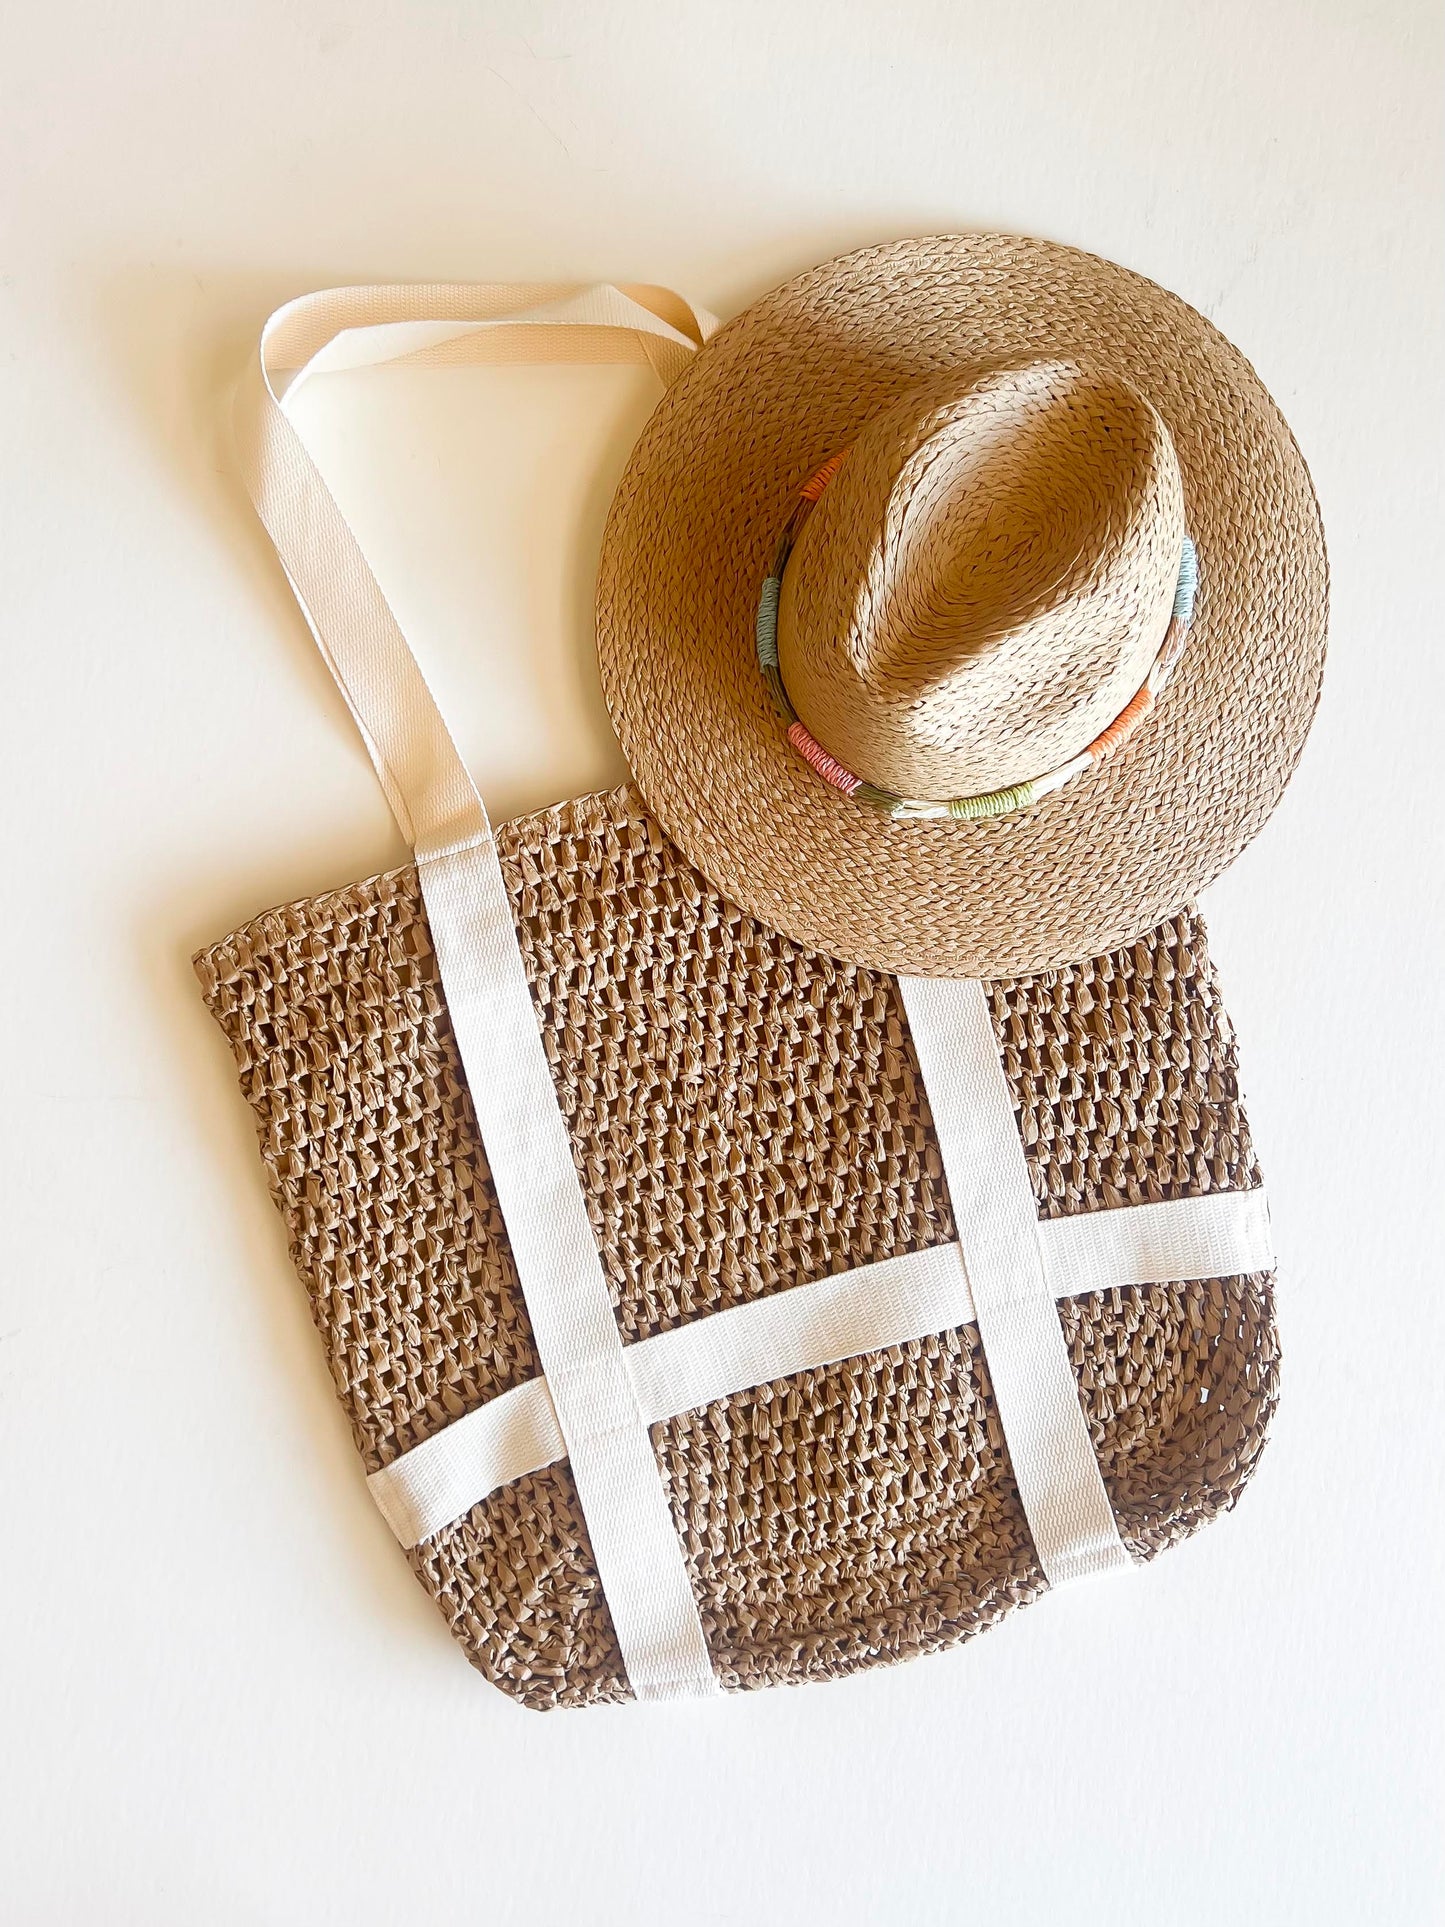 Hat Carrying Tote | Straw Hat Bag | Rattan and Canvas Vacation Purse